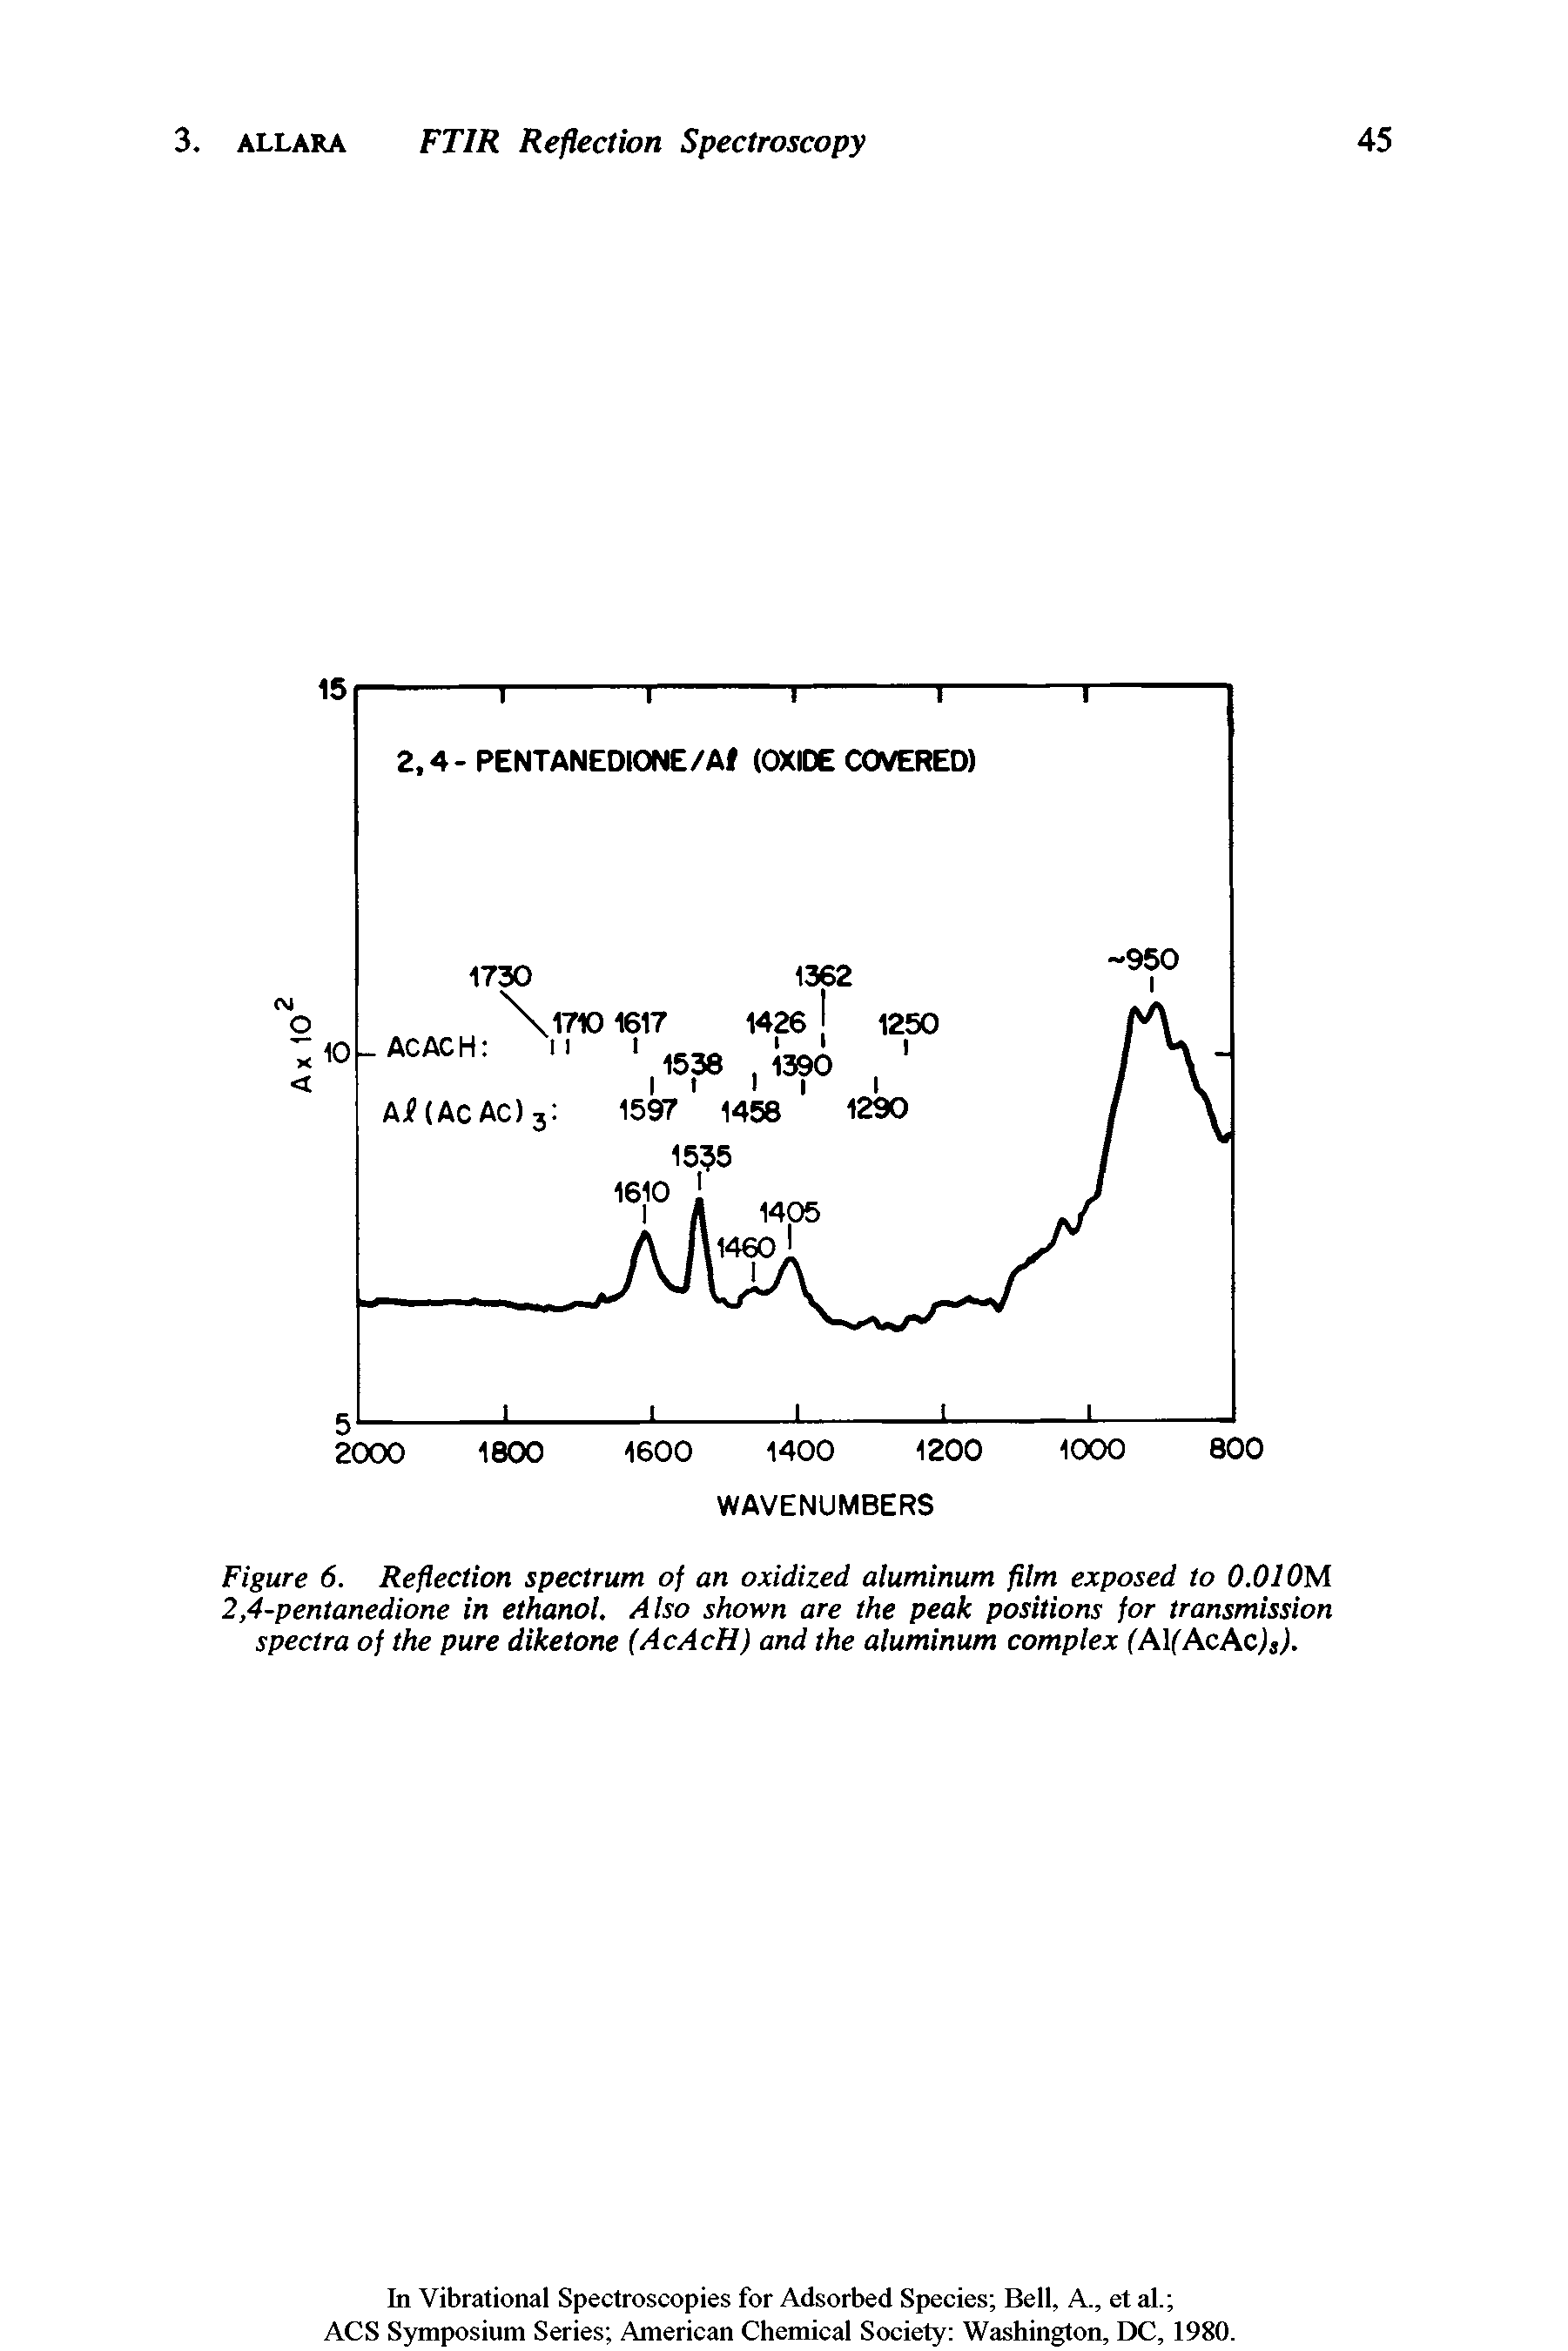 Figure 6. Reflection spectrum of an oxidized aluminum film exposed to 0.01 OM 2,4-pentanedione in ethanol. Also shown are the peak positions for transmission spectra of the pure diketone (AcAcH) and the aluminum complex (Al(AcAc)s).